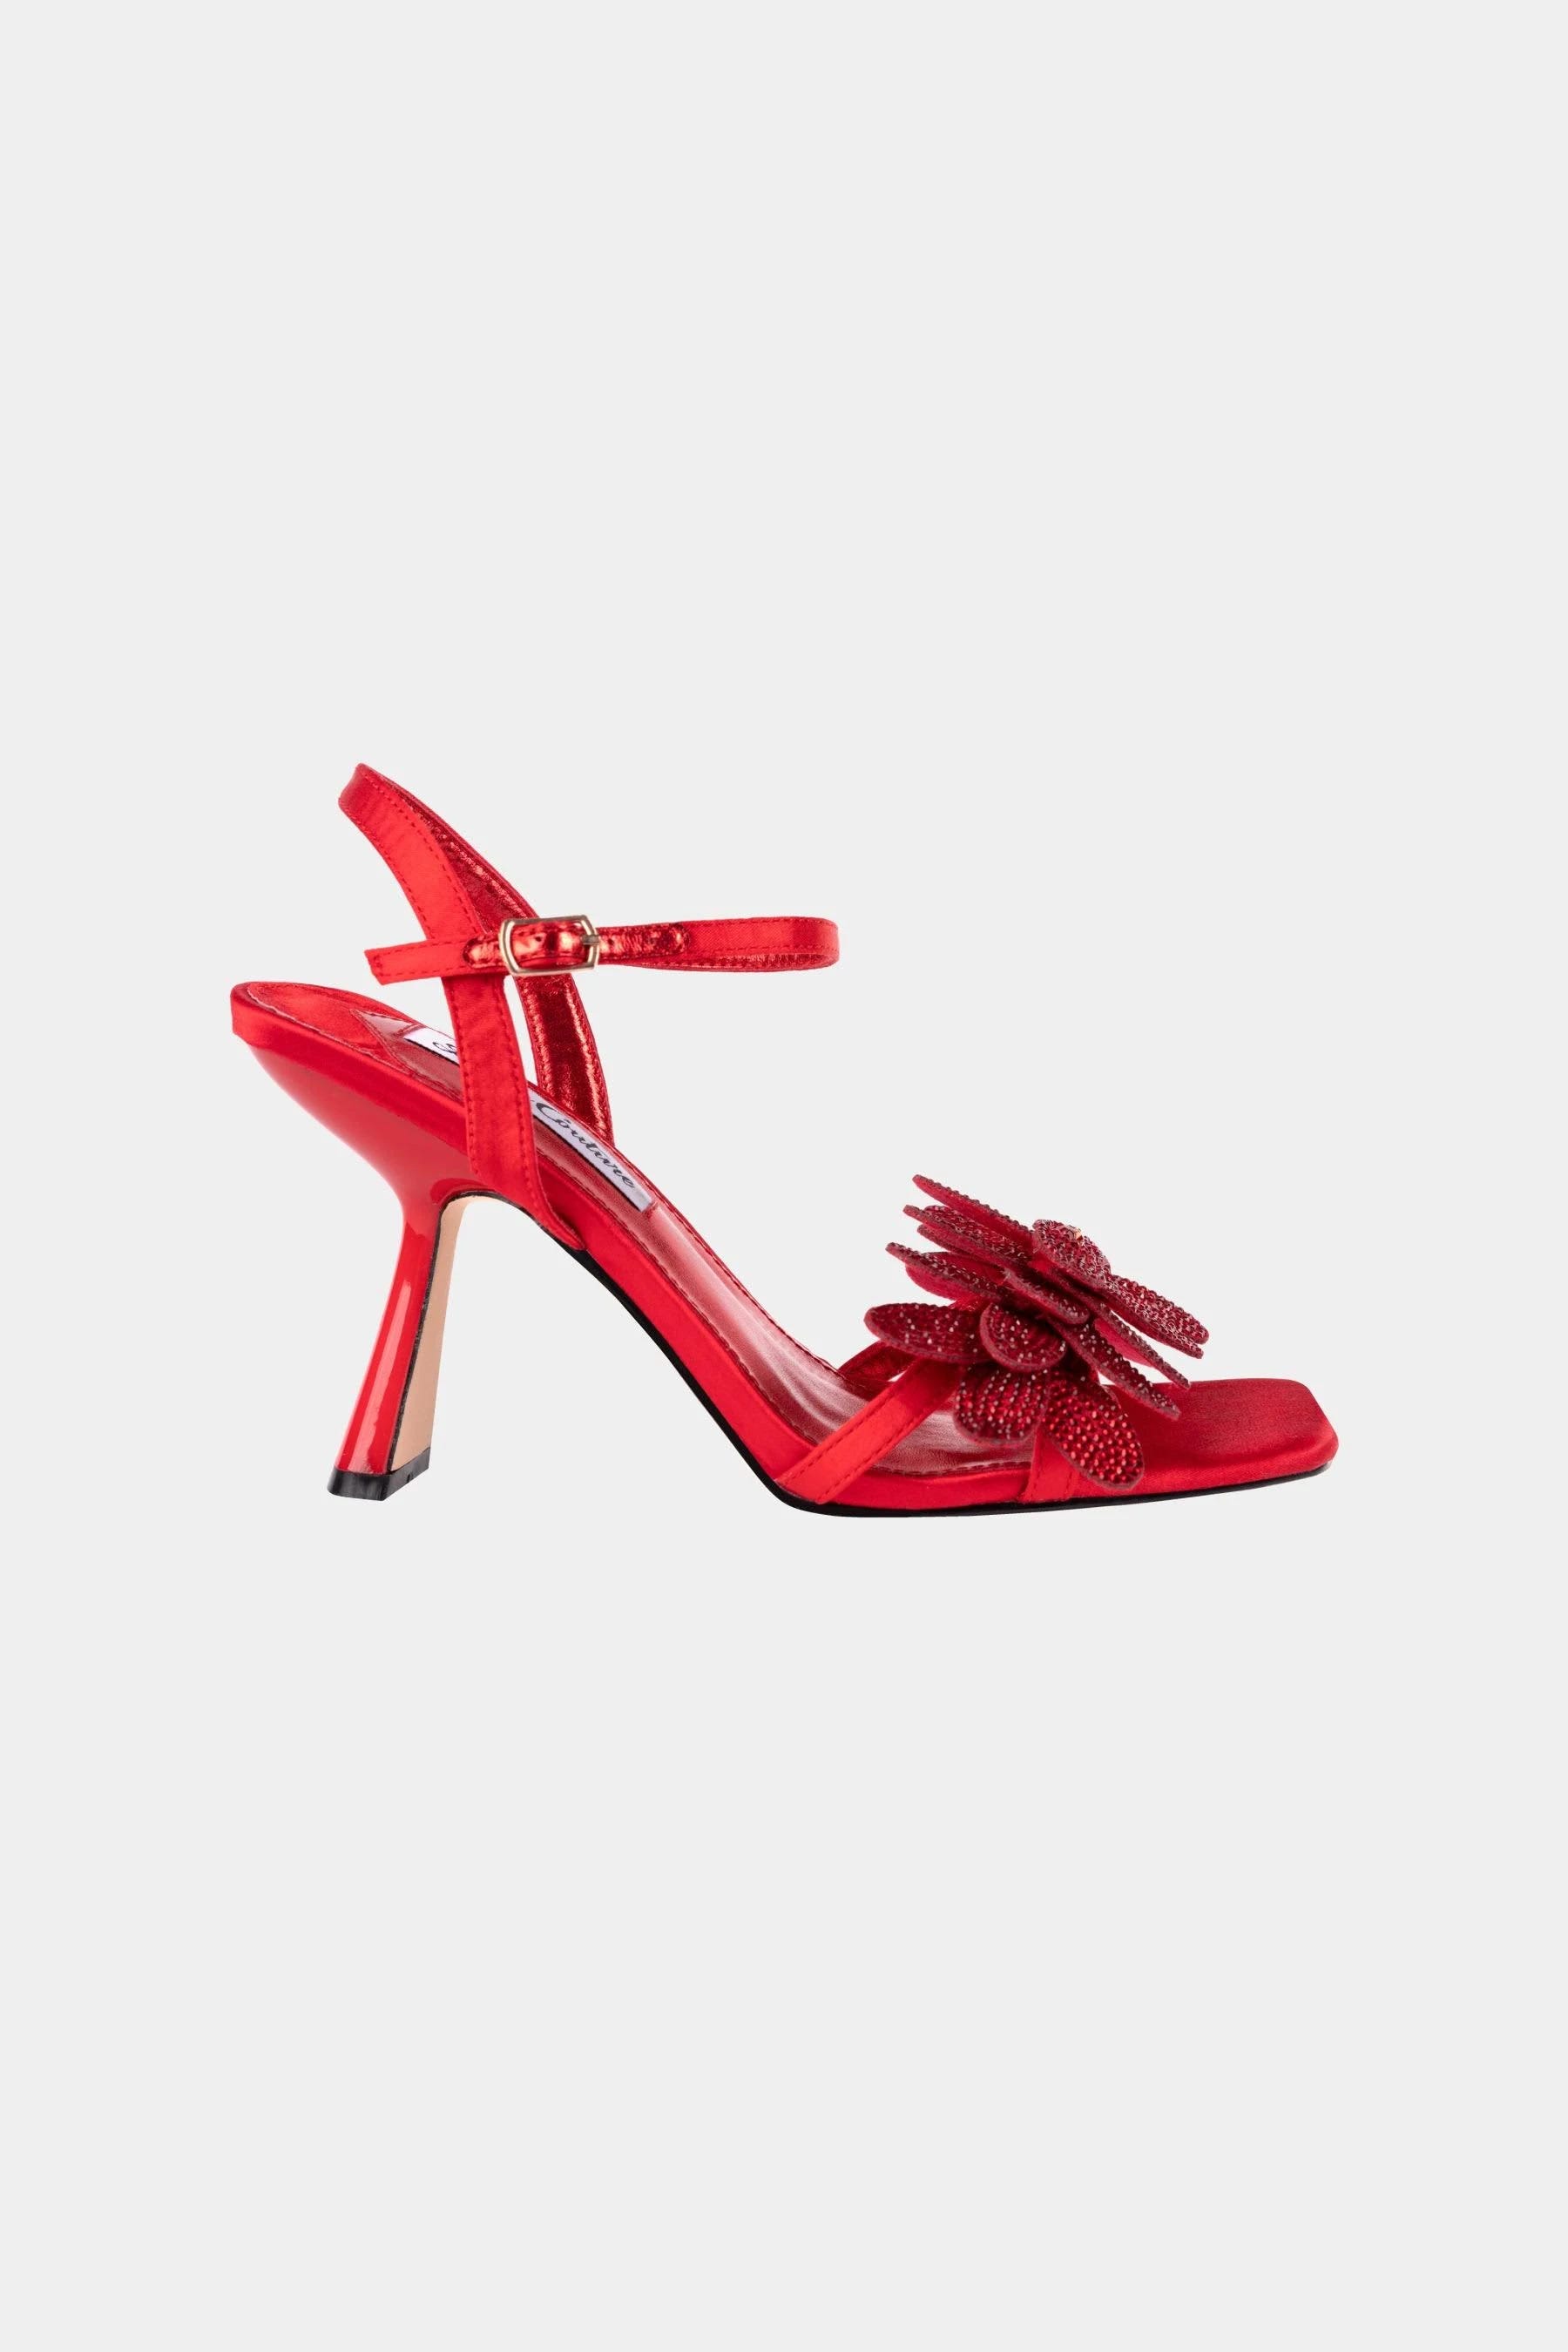 Lady Couture Lust Red Dress Sandals | Image